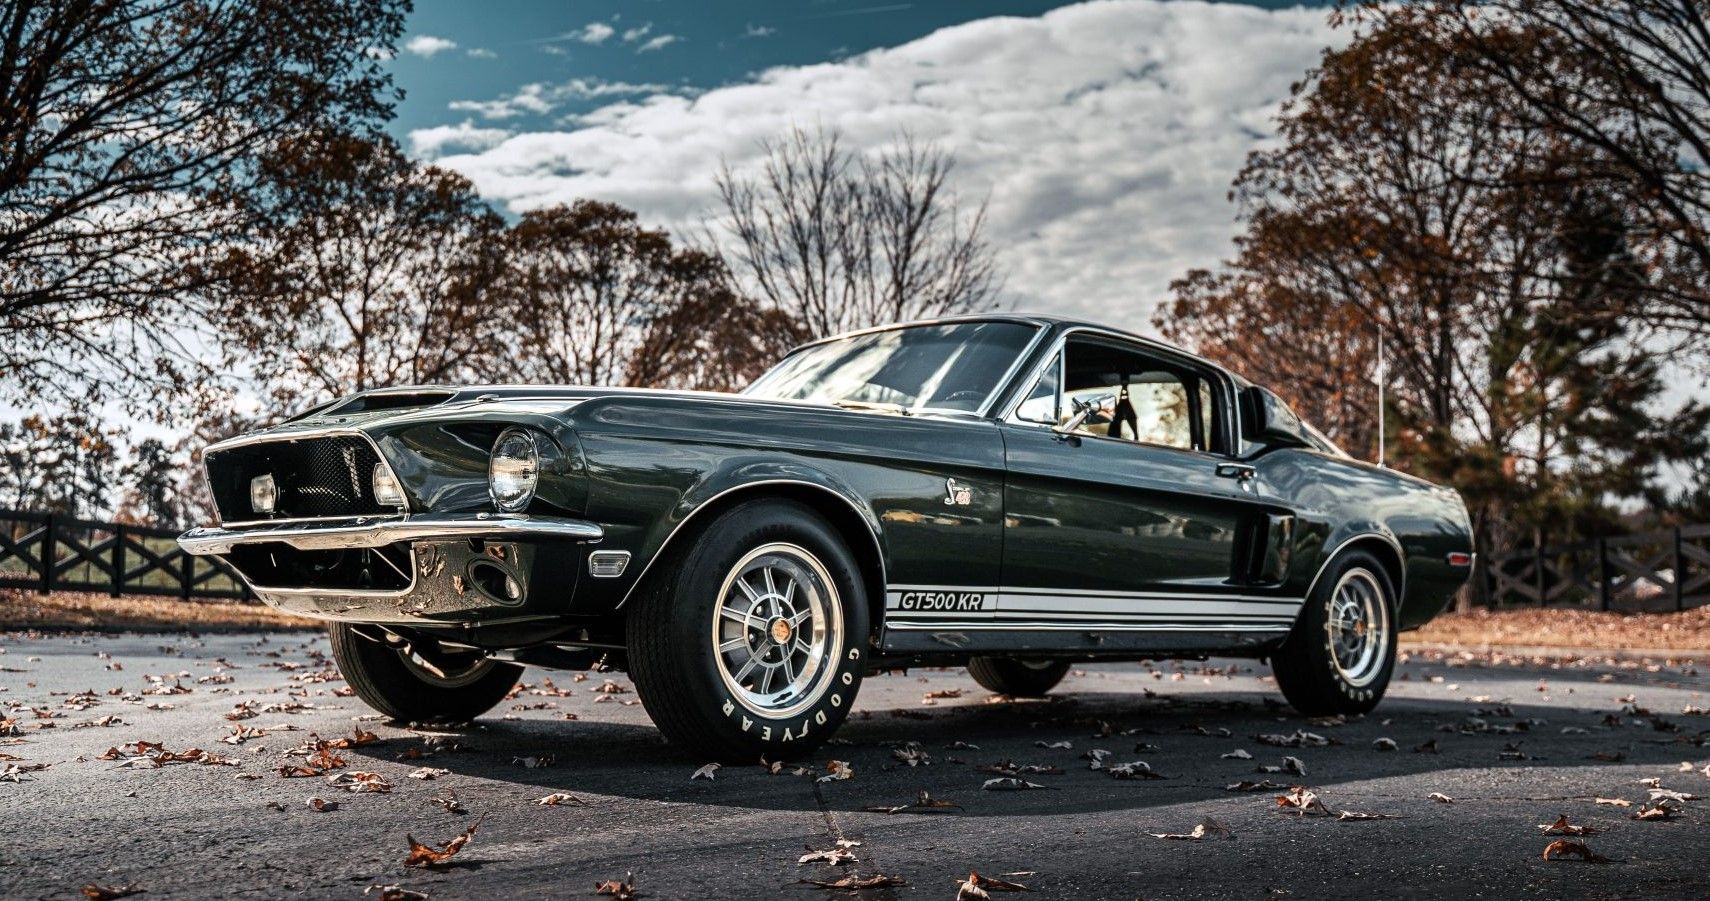 Why The Ford Mustang Shelby GT500KR Was A Legendary American Muscle Car